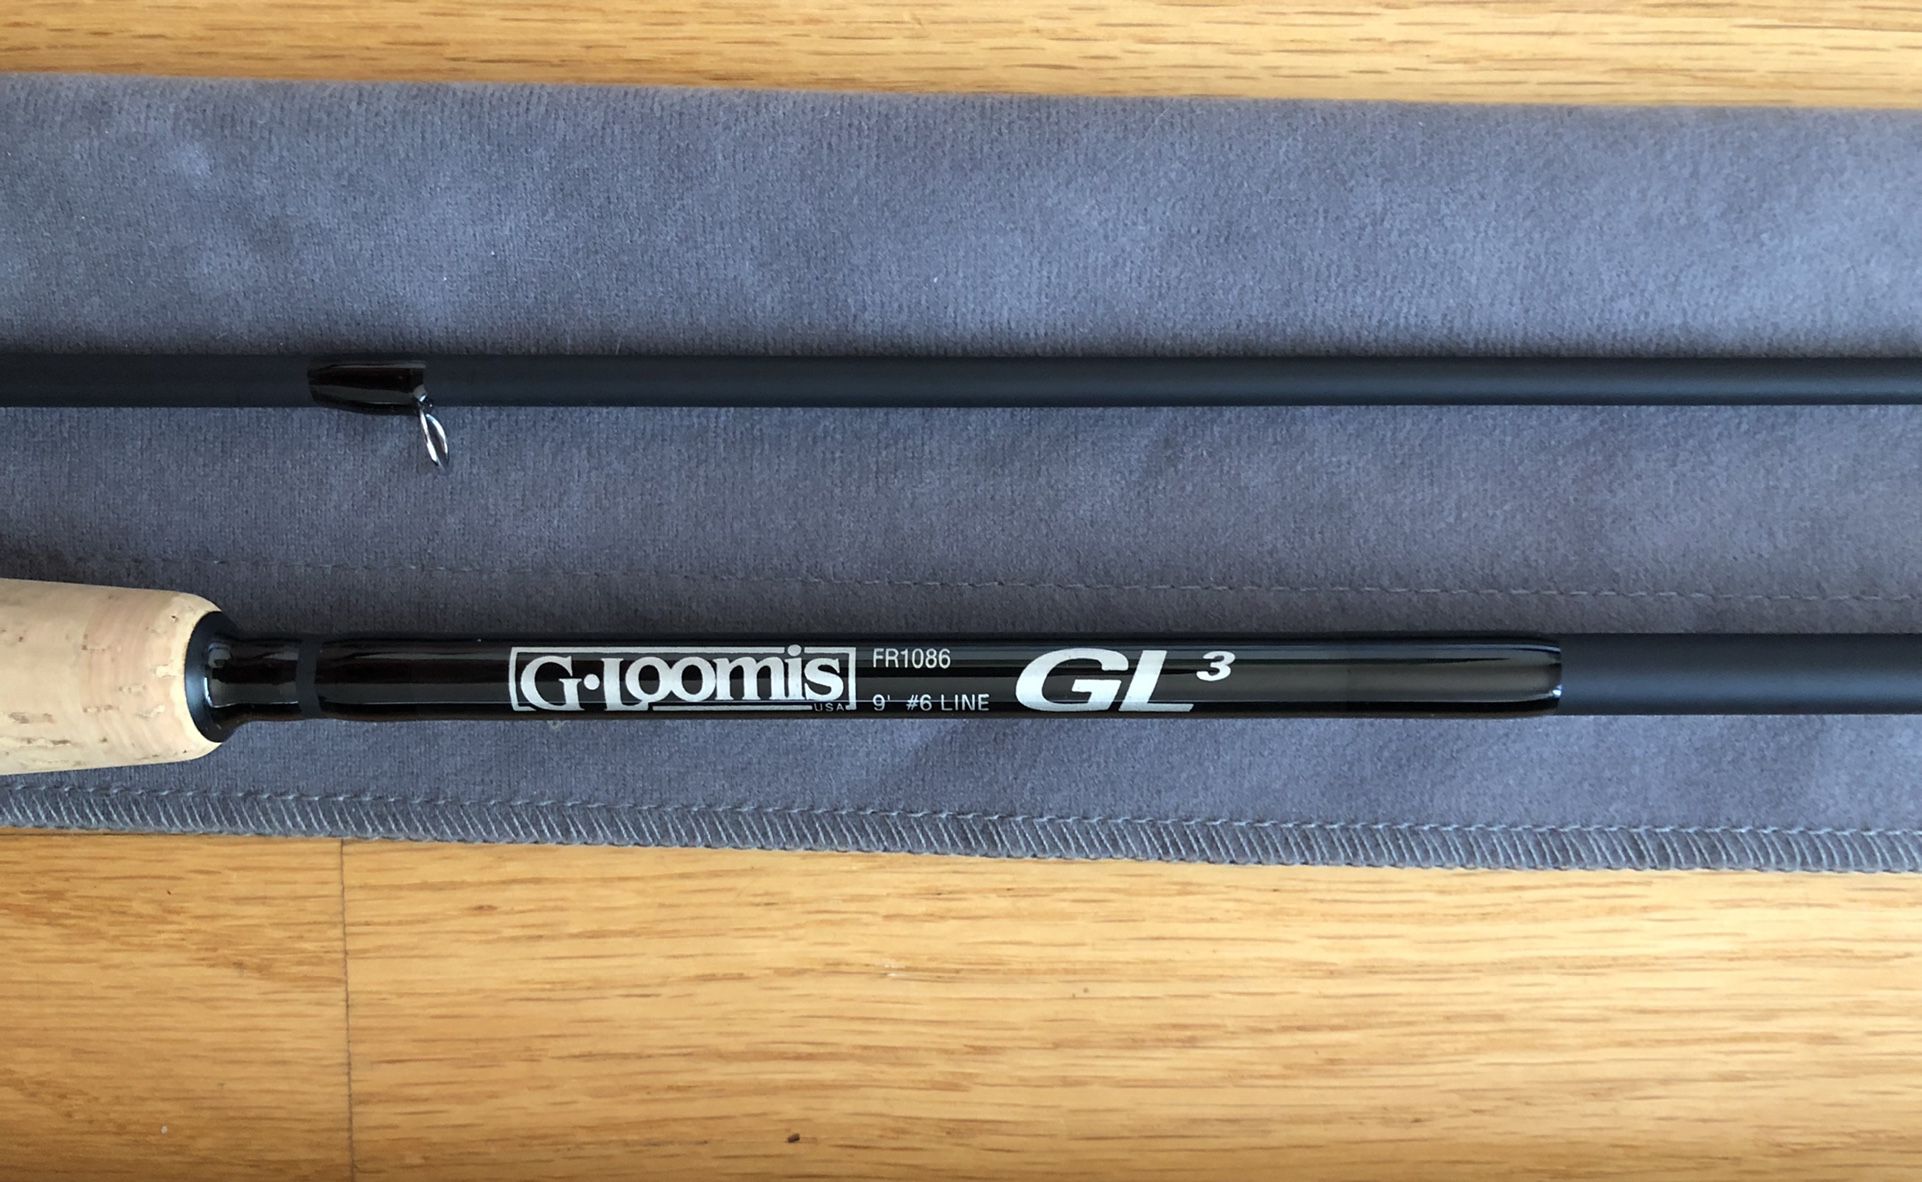 G-Loomis Fly Rod for Sale in San Jose, CA - OfferUp